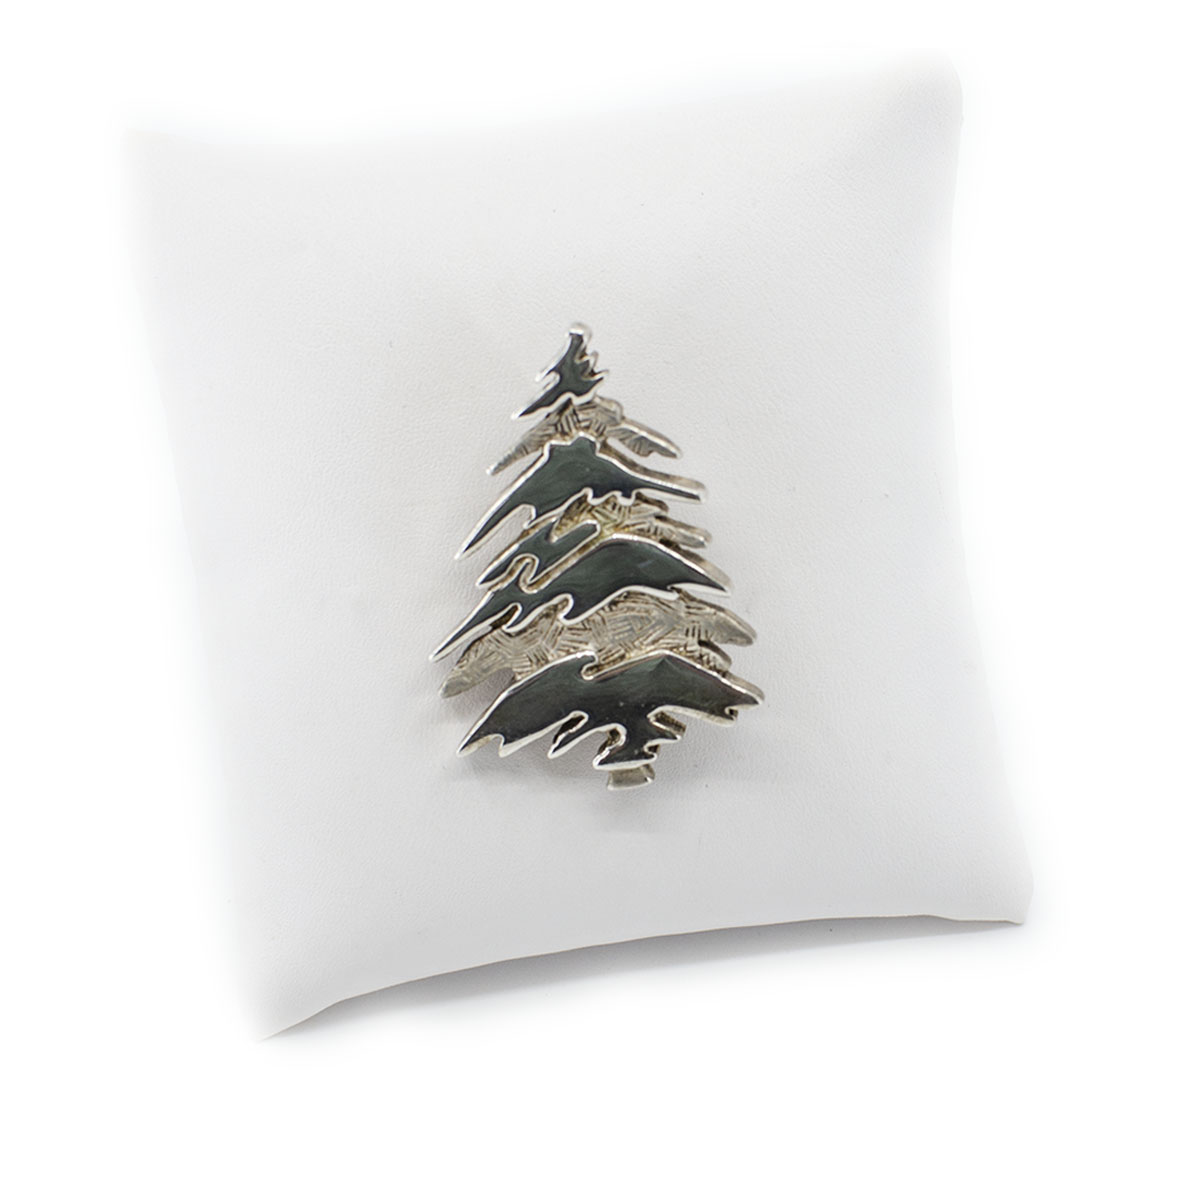 Vintage sterling silver christmas tree pin